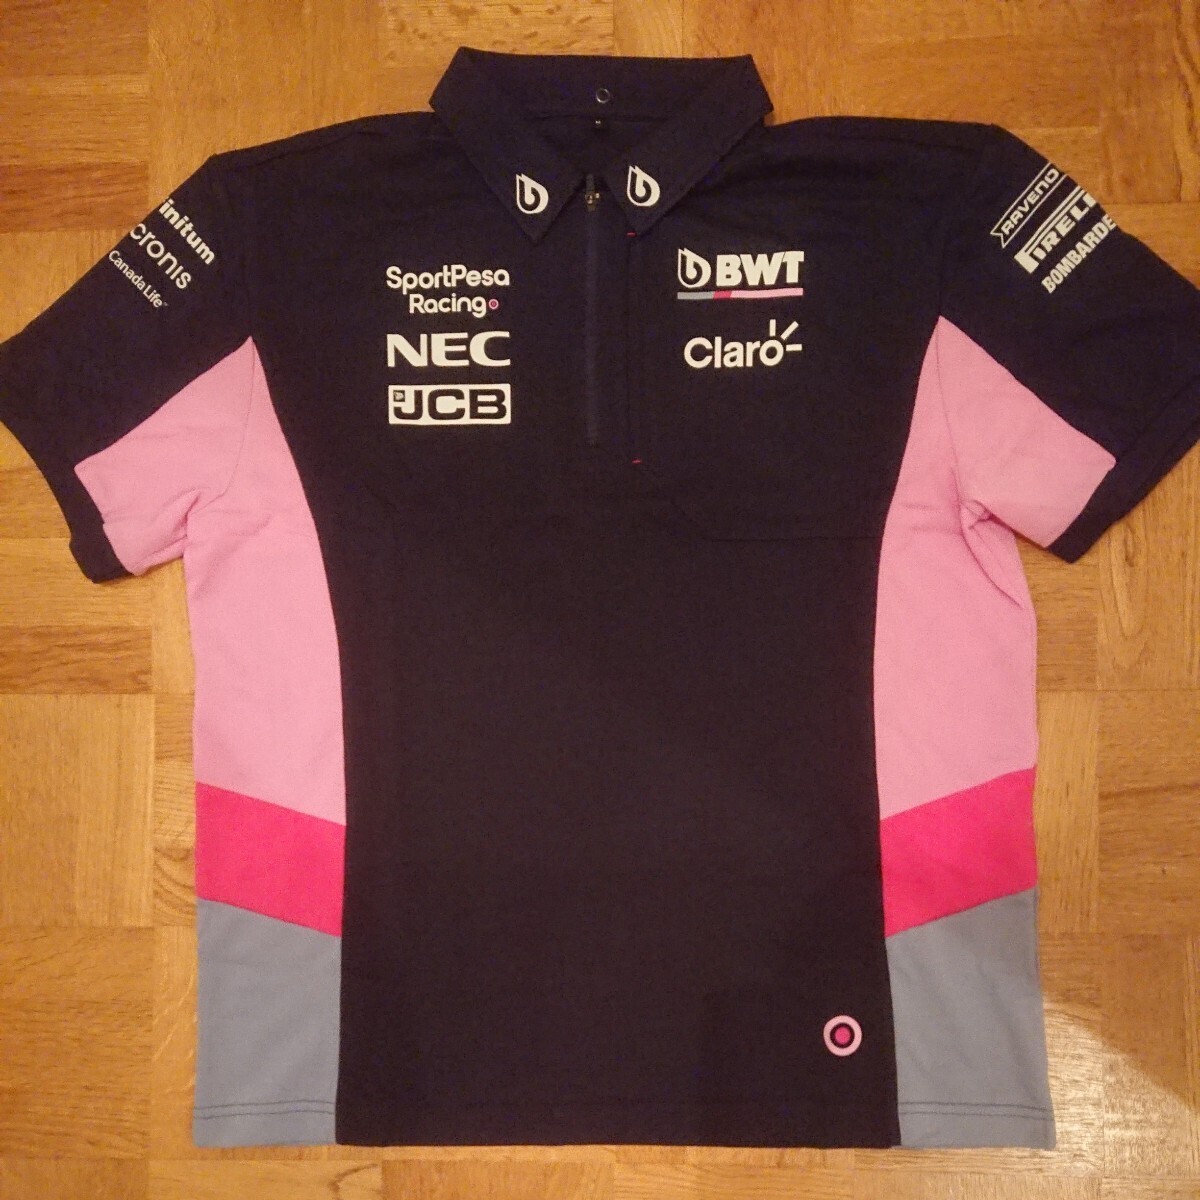  not for sale 2019 BWT sport pesa racing Point force Indy a Mercedes F1 team supplied goods polo-shirt M size HACKETT S. Perez 